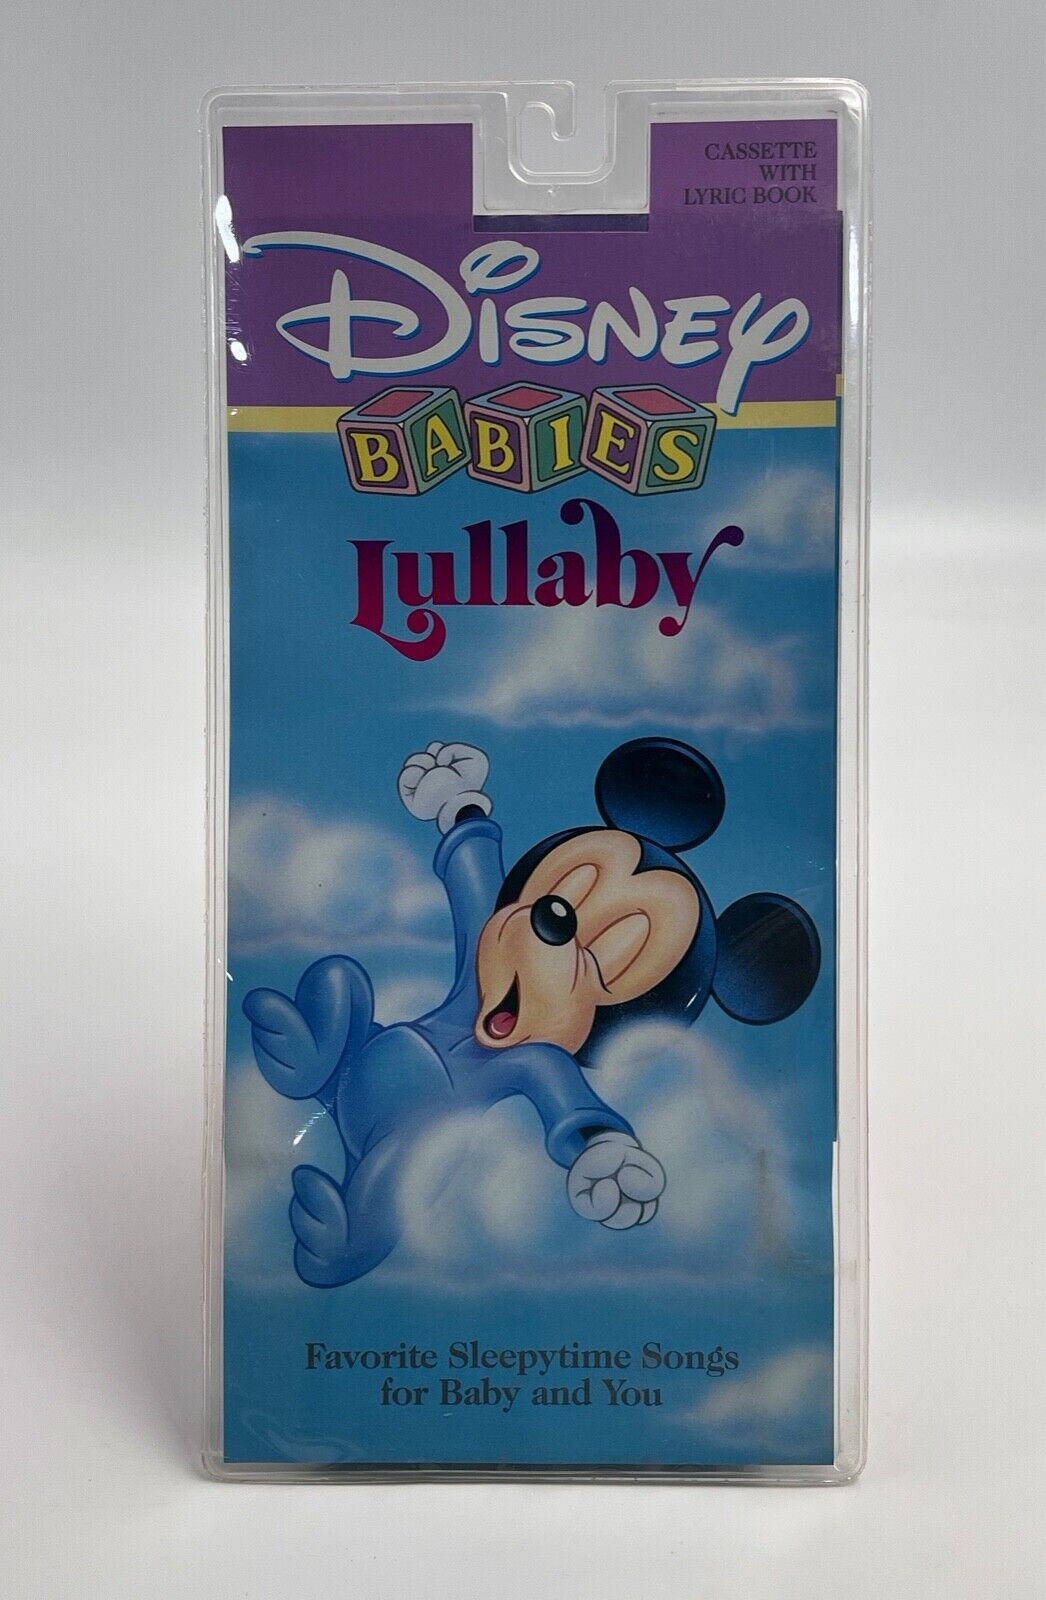 Vintage Disney Babies Lullaby Cassette Tape with Lyric Book New in Package